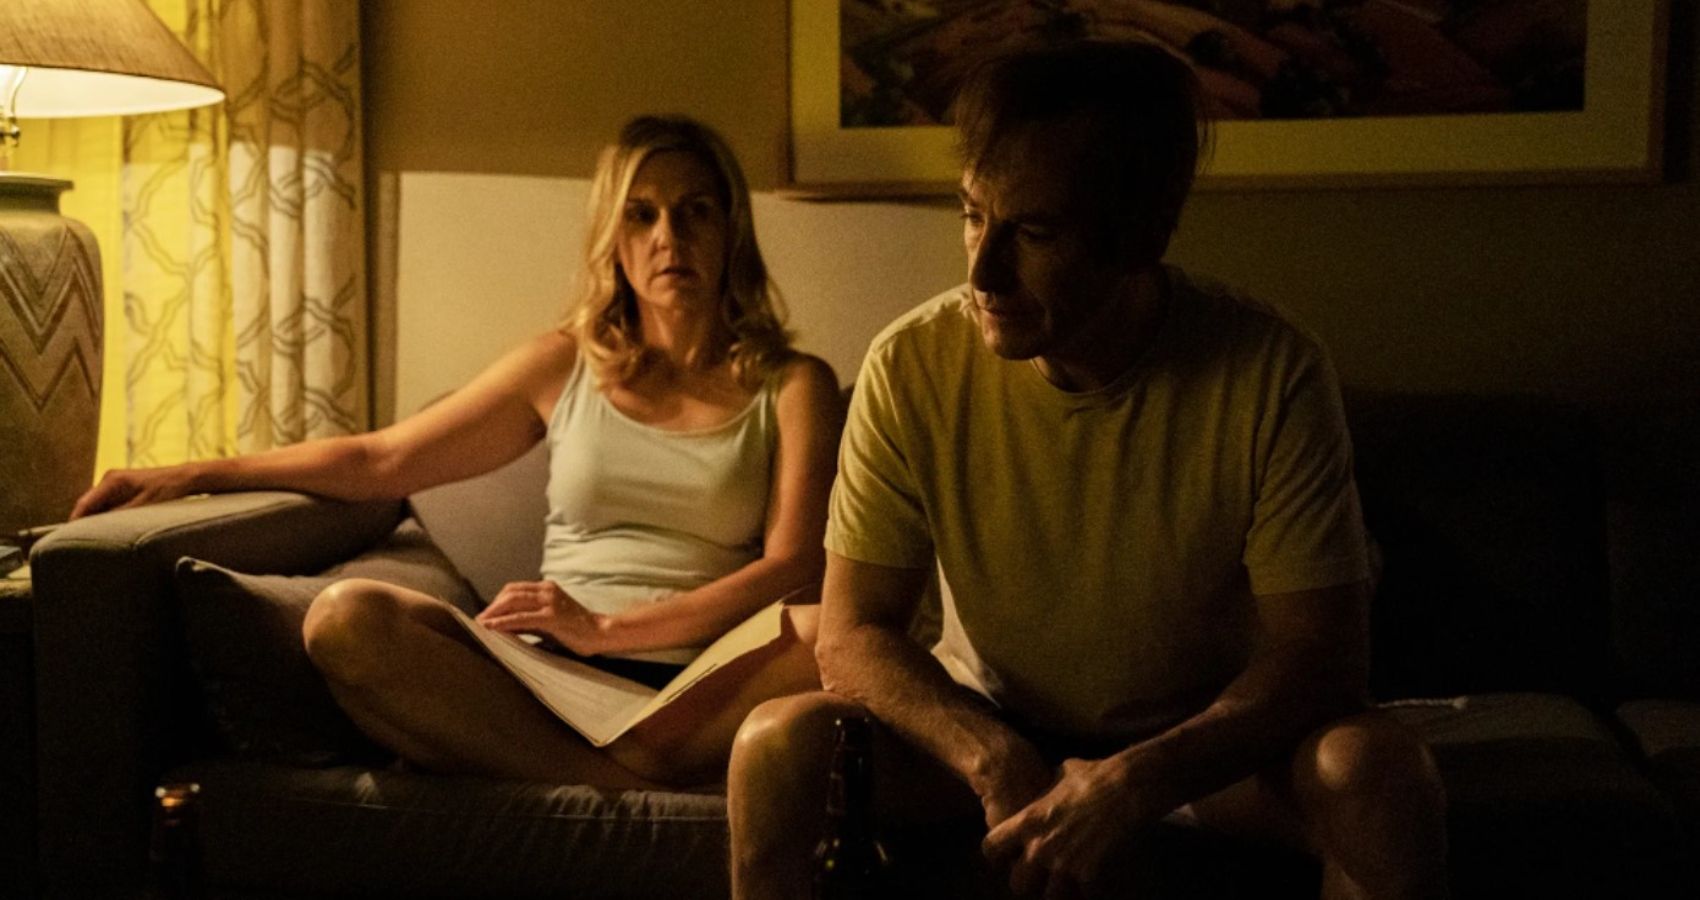 Better Call Saul Series Finale Recap: Jimmy and Kim's Fraught Reunion